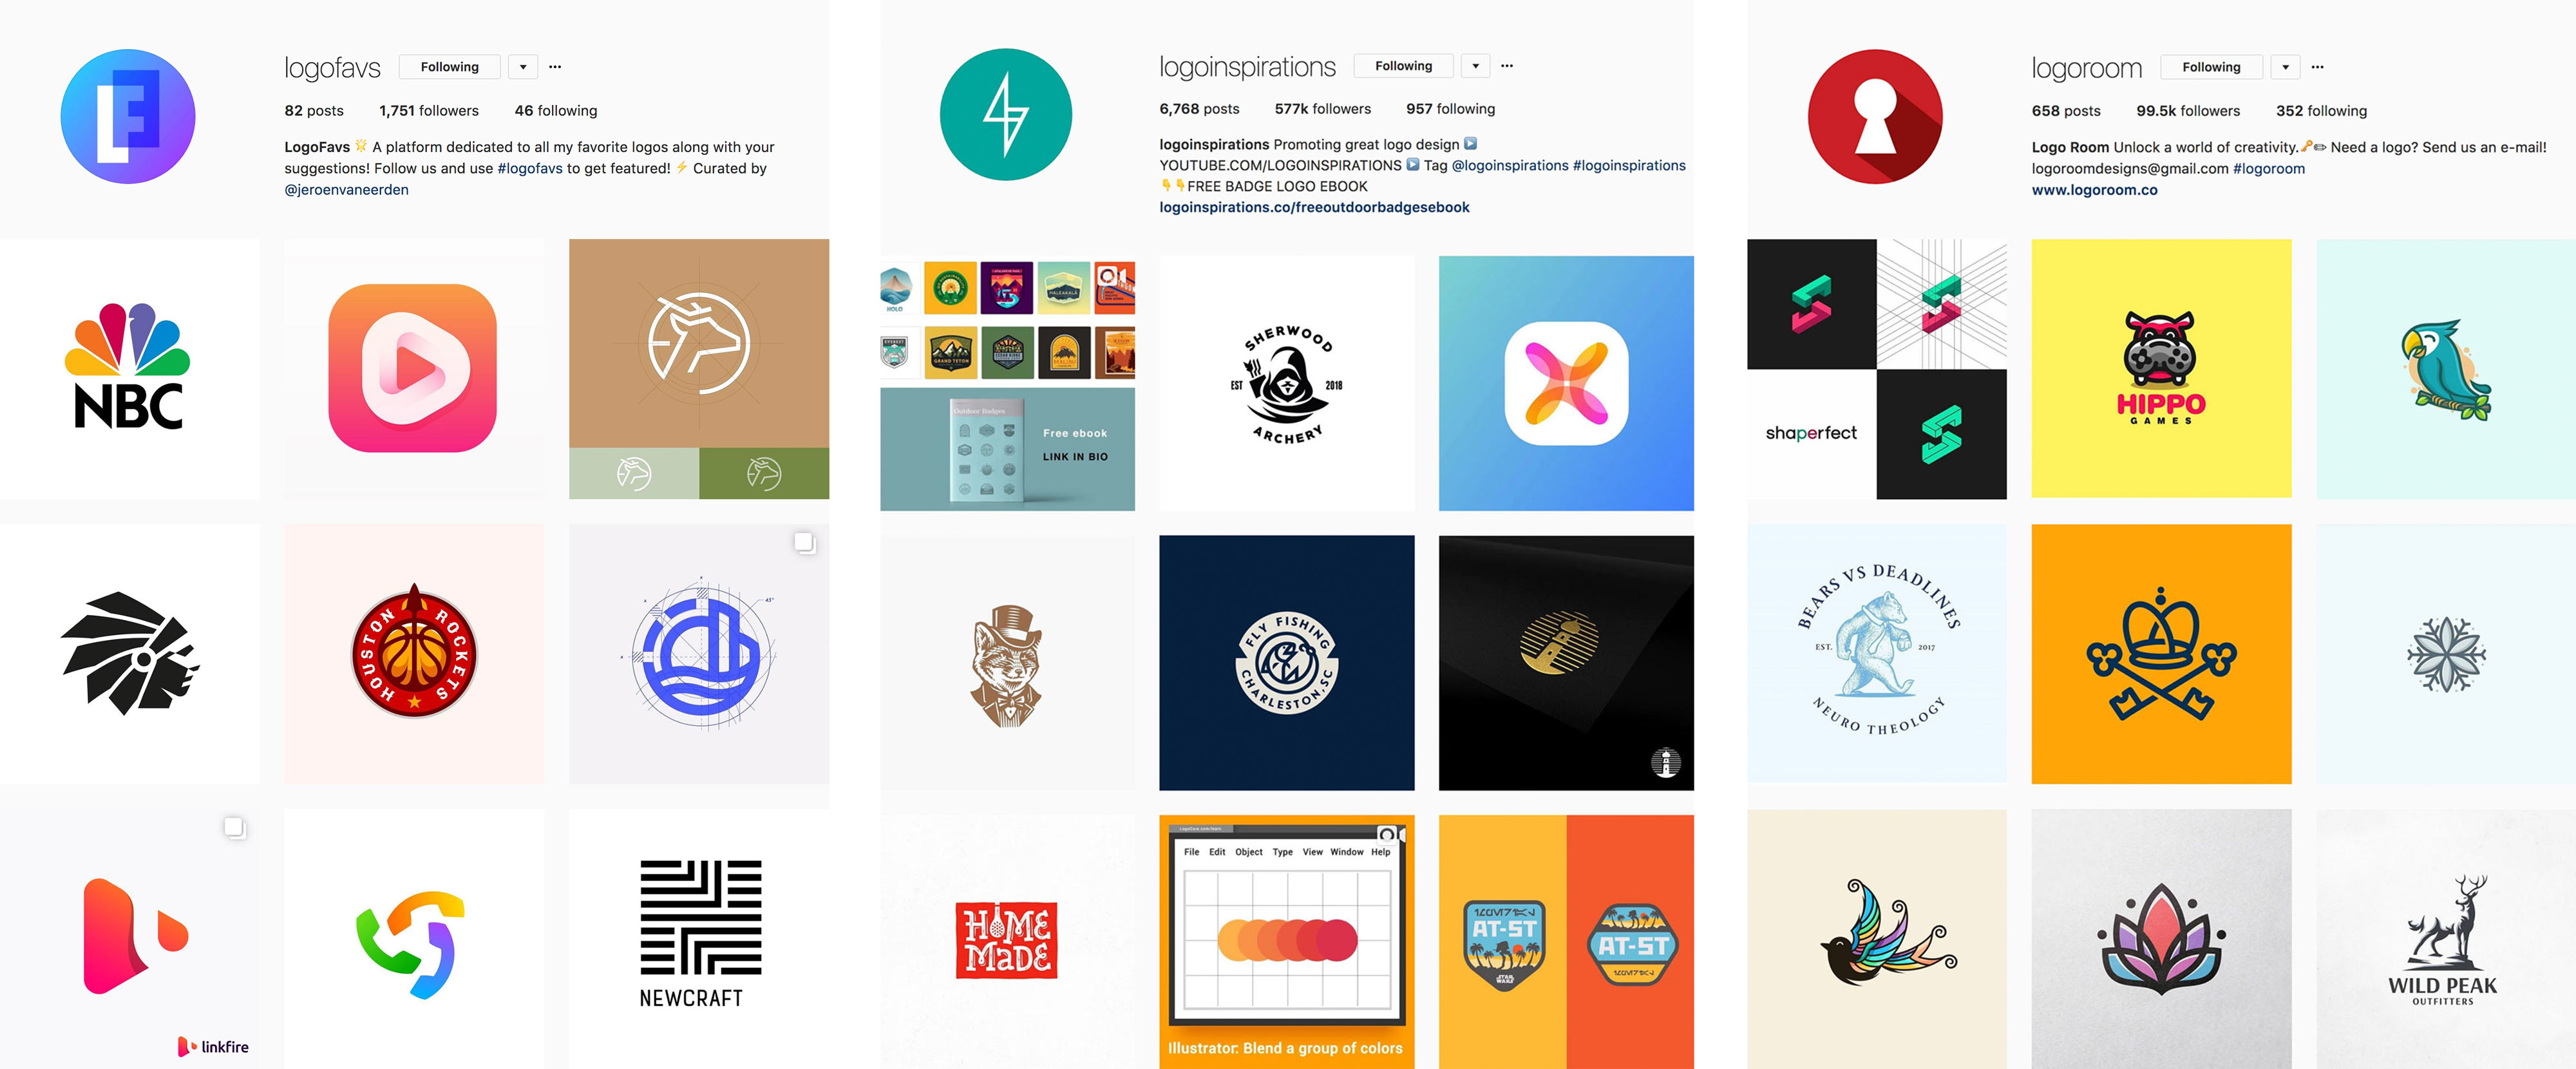 the 18 best instagram accounts for logo design inspiration - which viner has the most followers on instagram